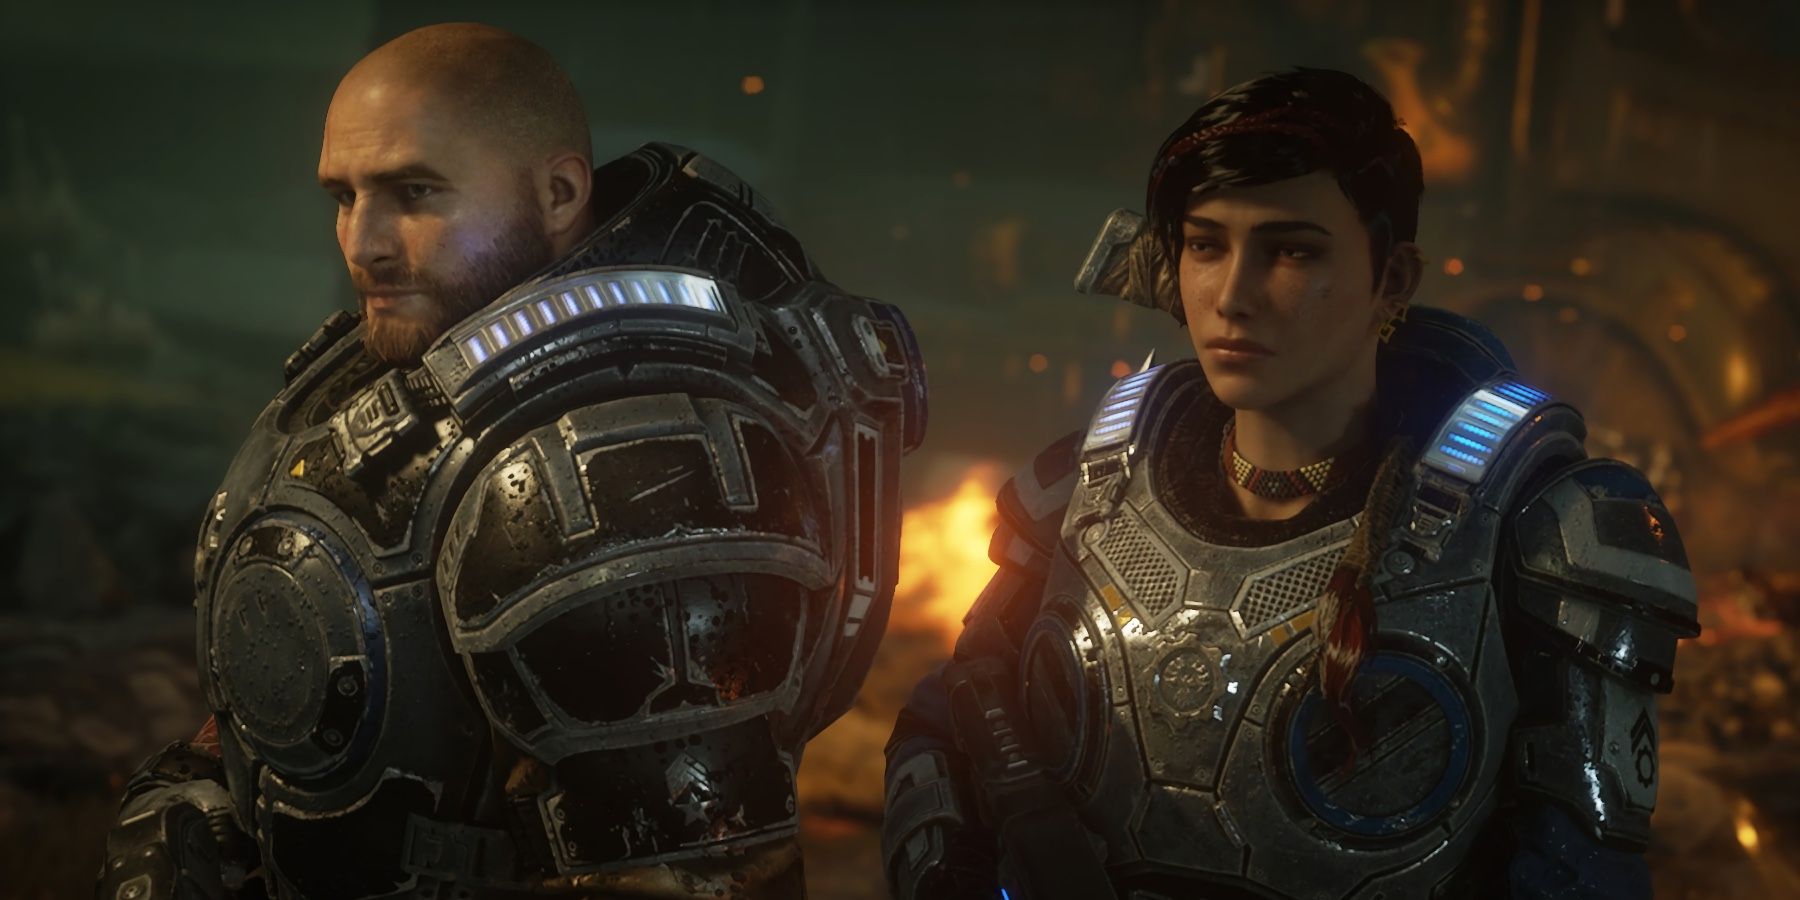 GEARS 6 Story - Campaign Gears 6 Story Teased by Marcus Fenix